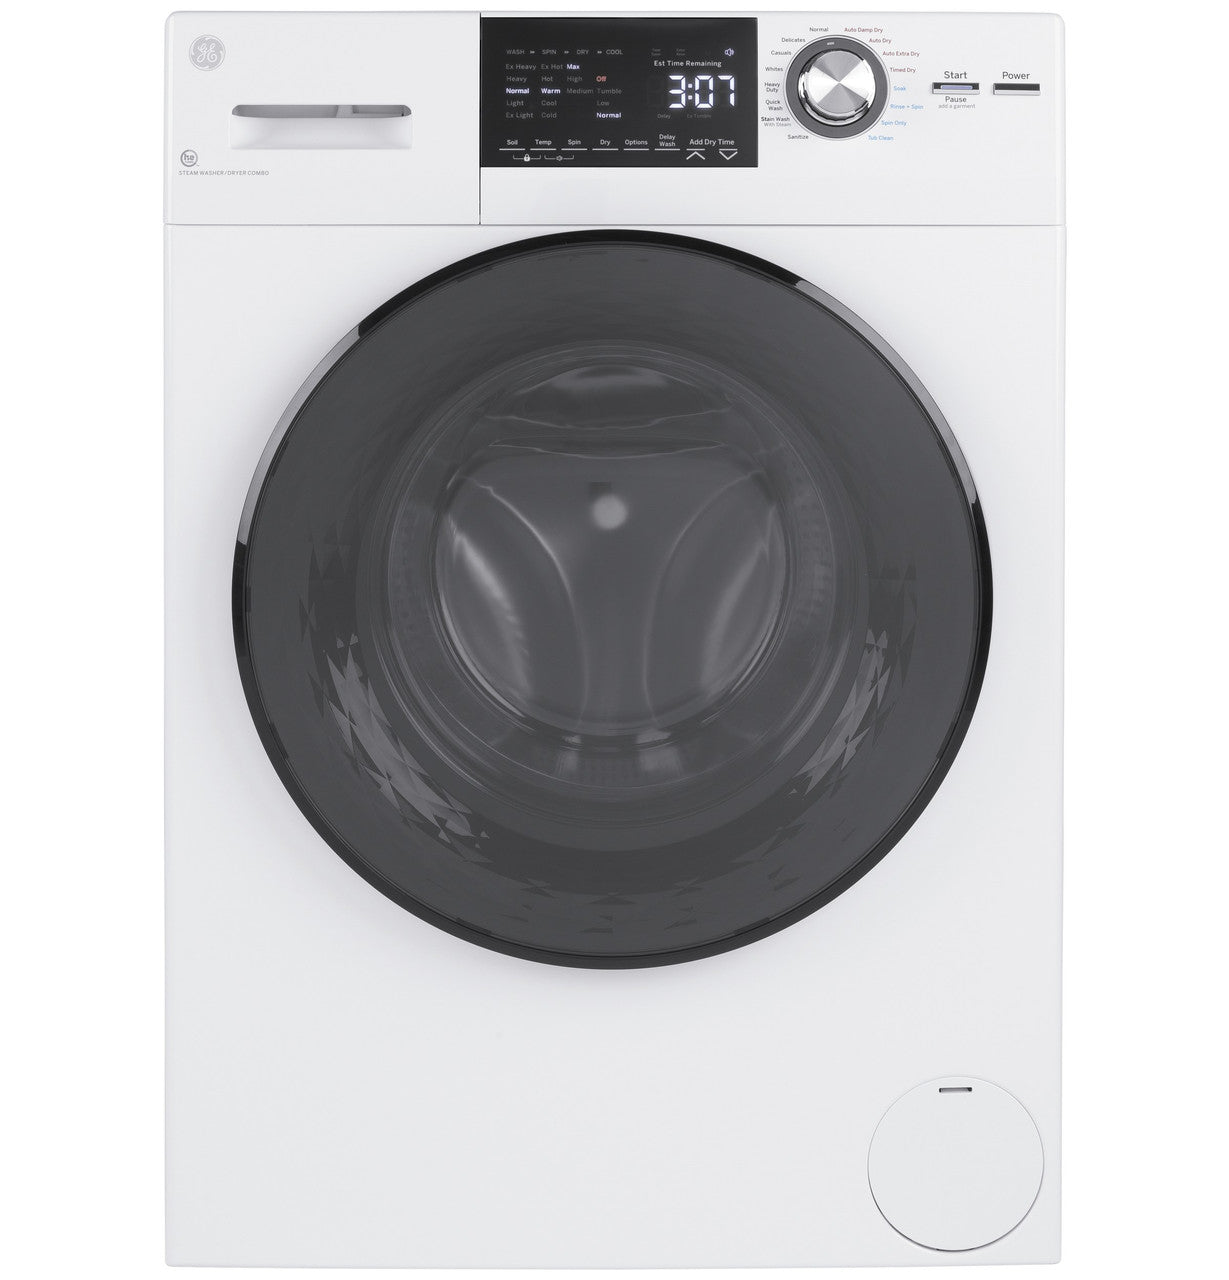 Appliances > Laundry > Washer & Dryer Combination